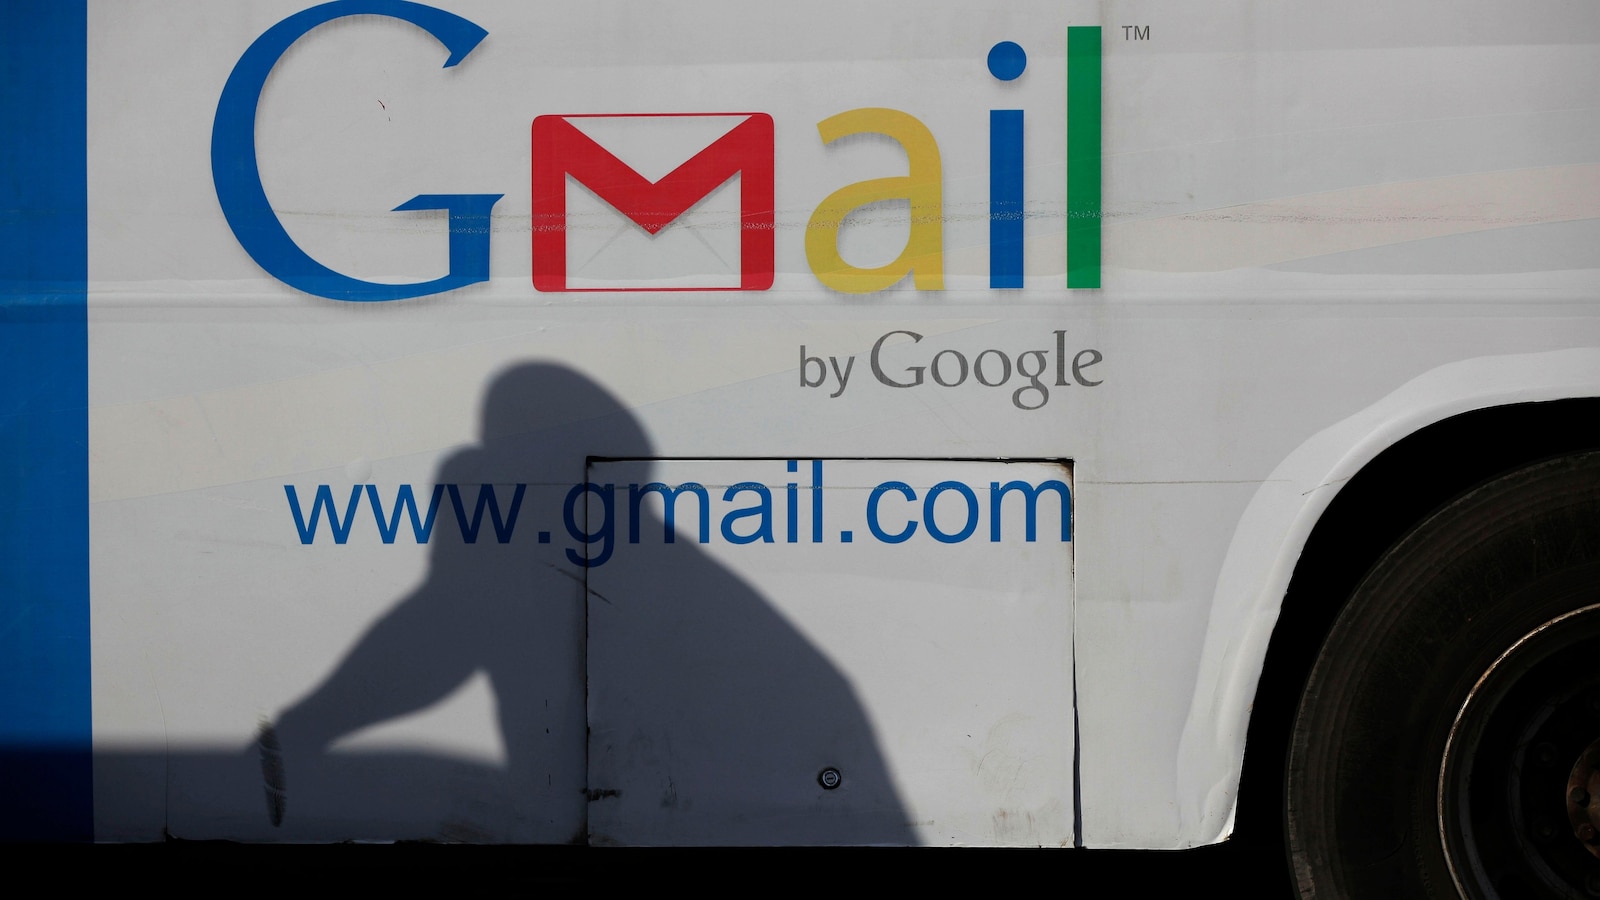 Gmail revolutionized email 20 years ago. People thought it was Google's